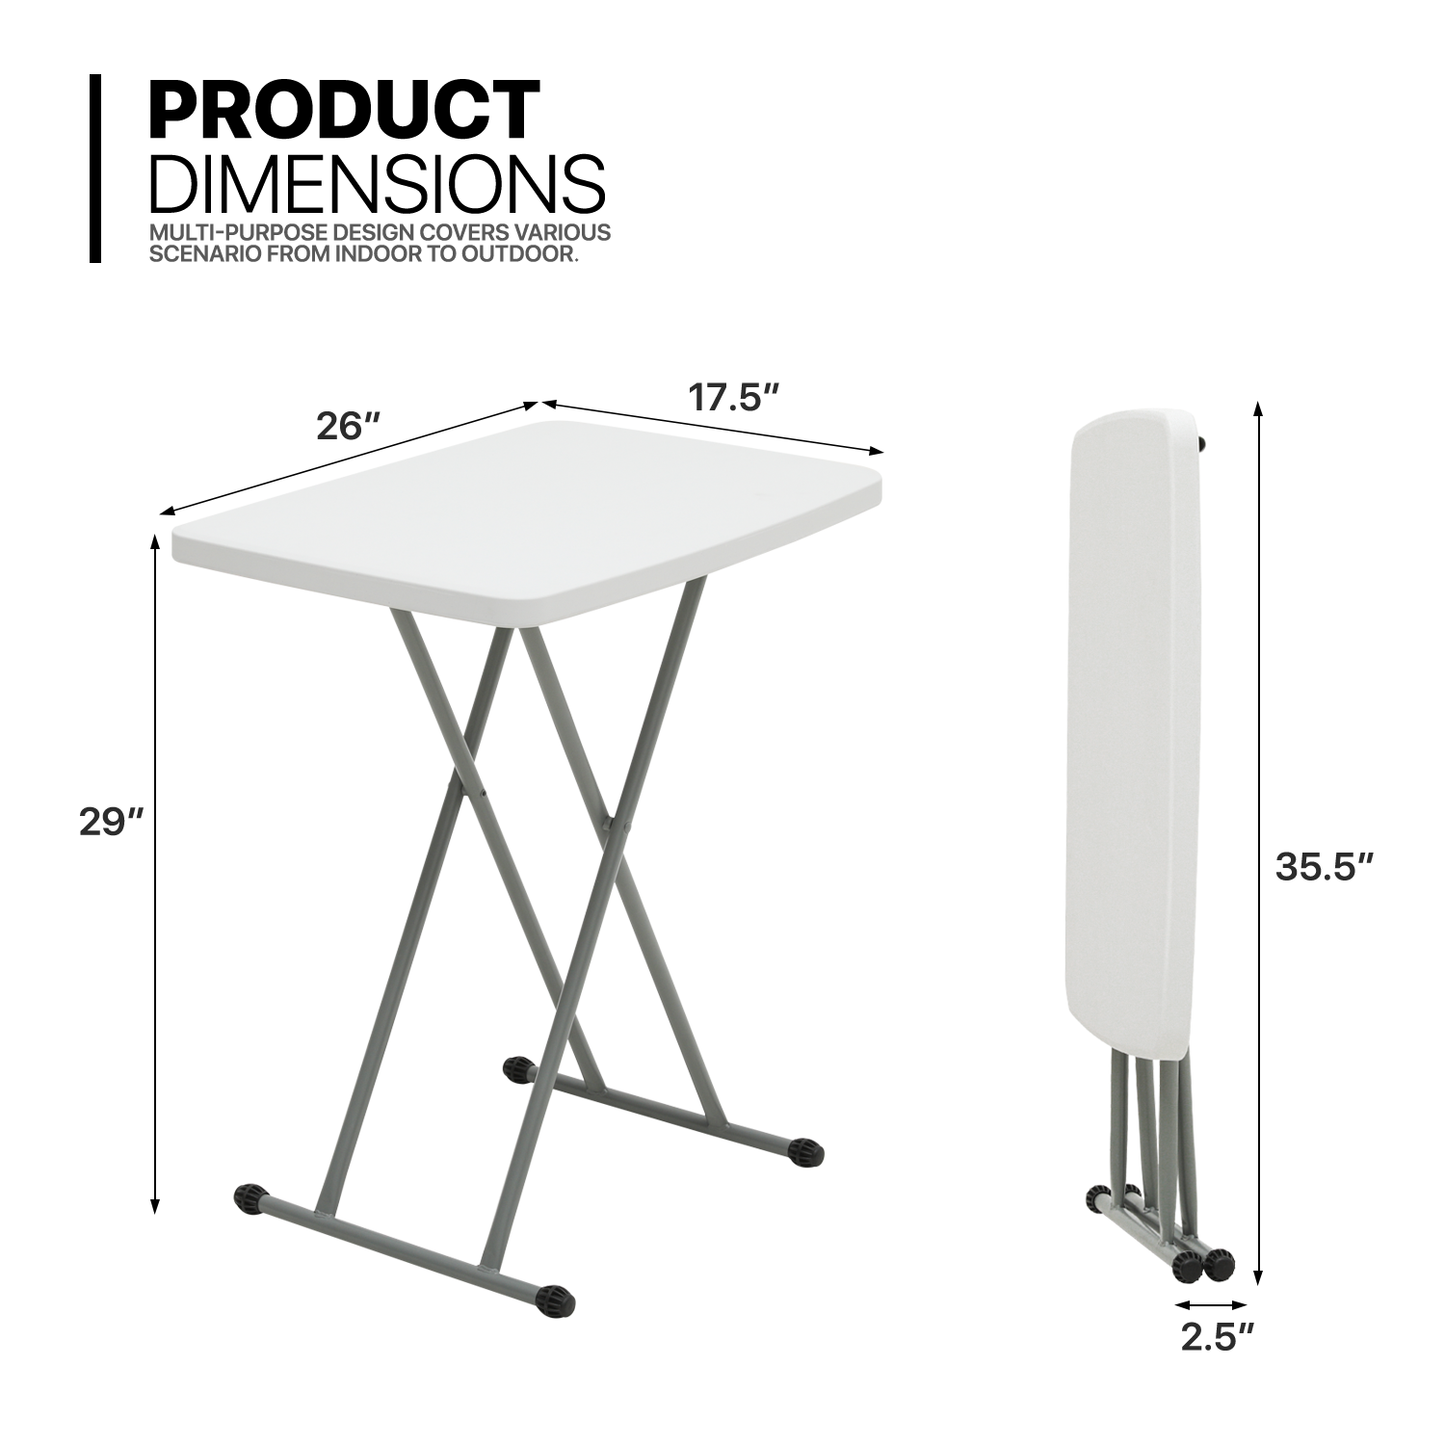 TV Tray 36"x17.5"x29" - 3 Motions Adjustable